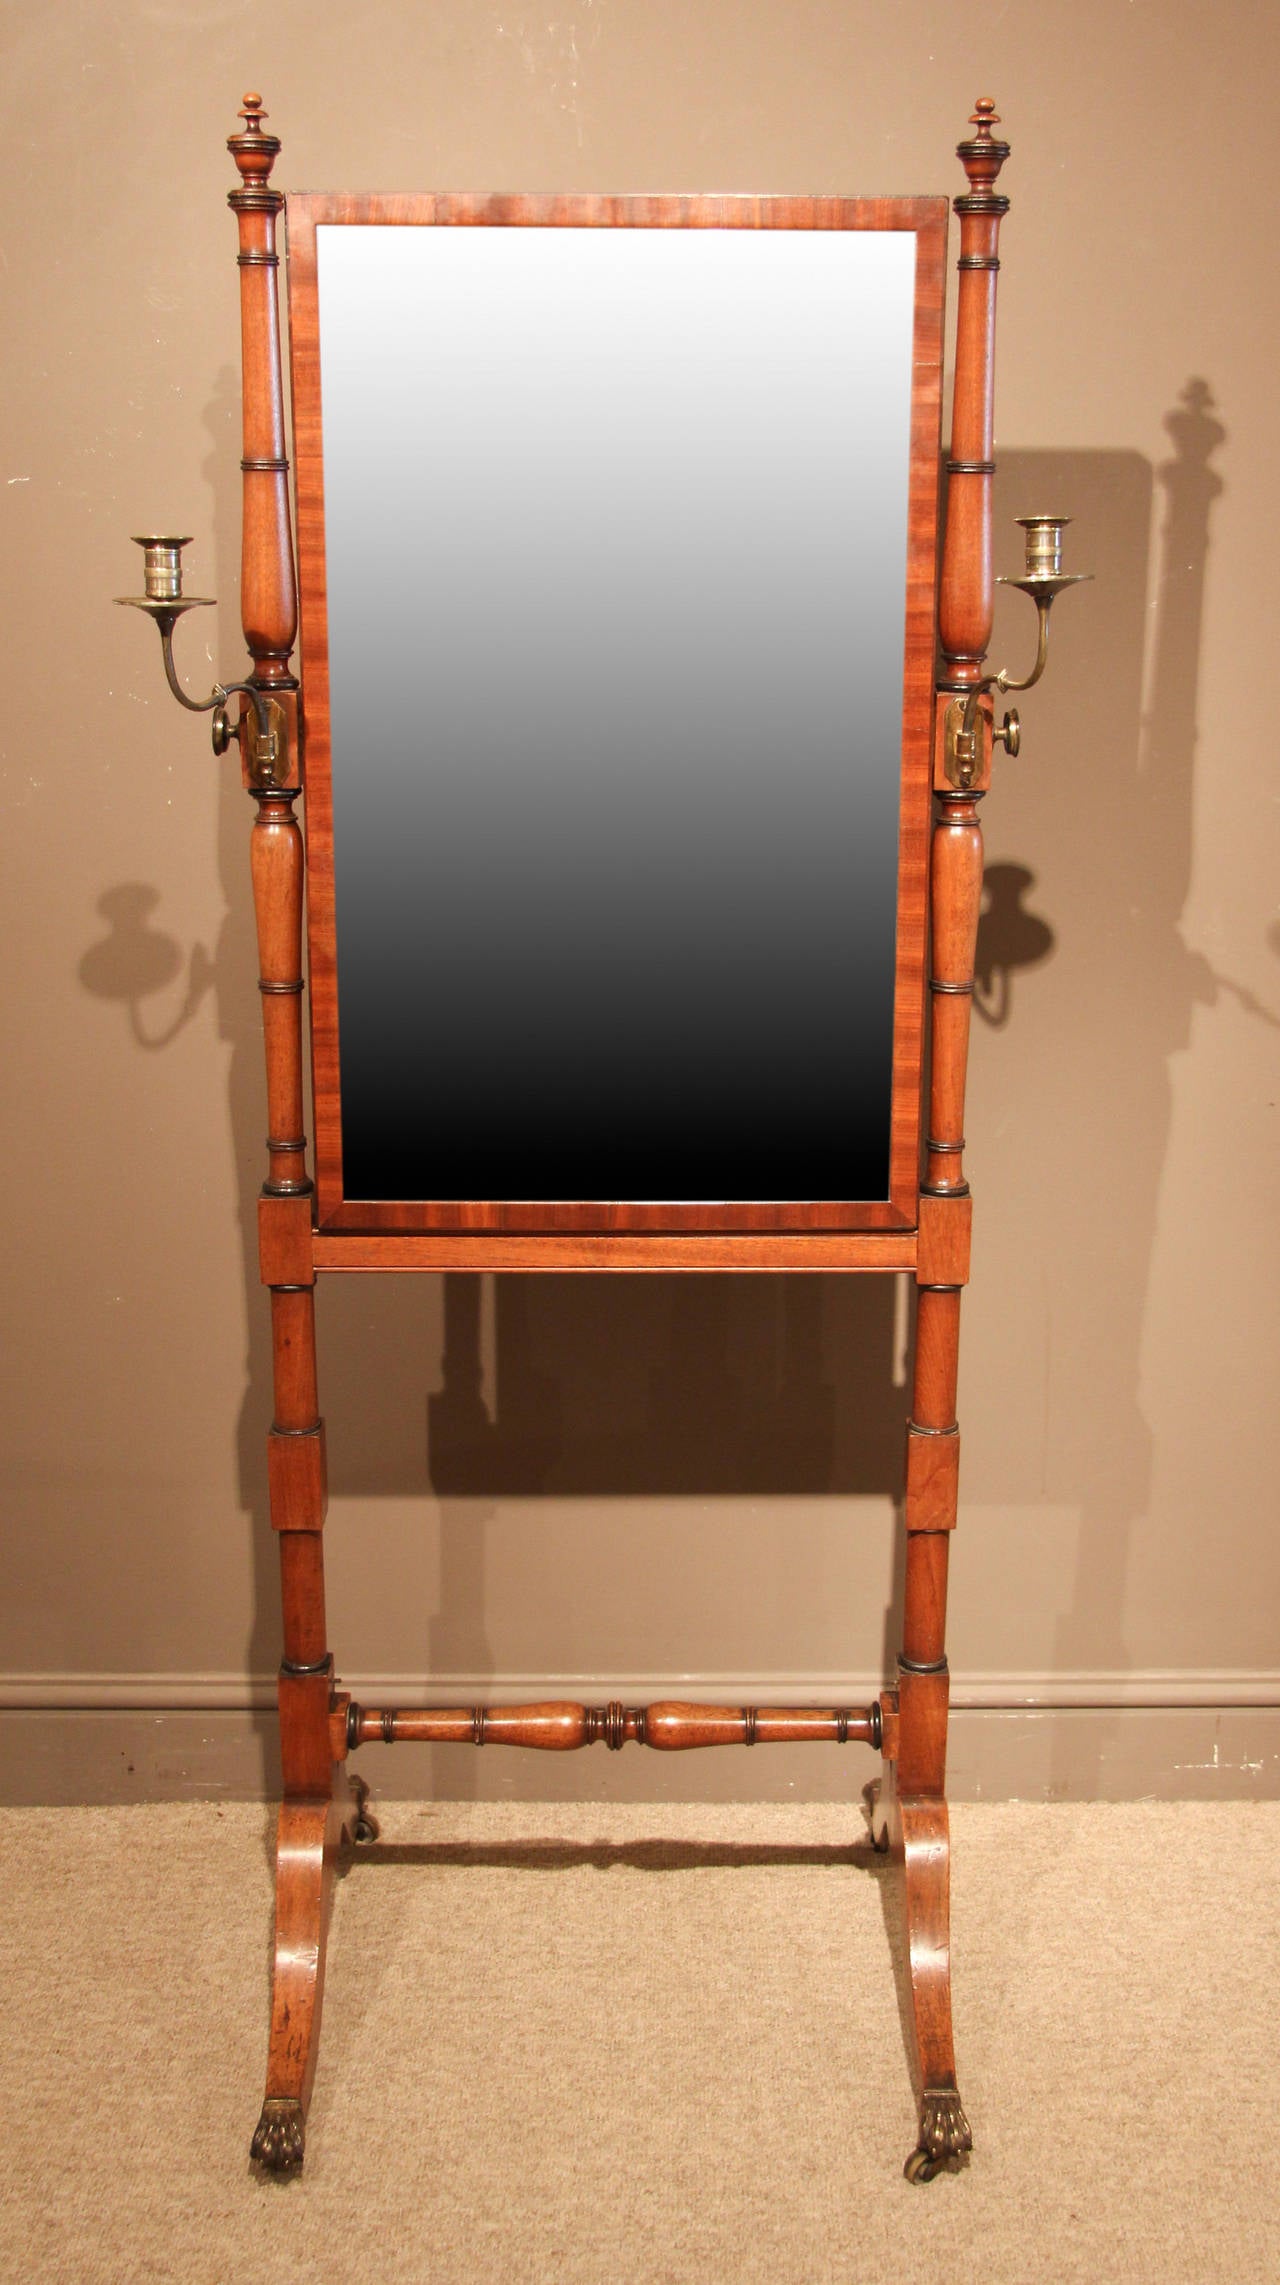 A rare Regency period mahogany cheval mirror with candle stands. Rare campaign/travelling feature, circa 1810. 

All of the items that we advertise for sale have been as accurately described as possible and are in excellent condition, unless